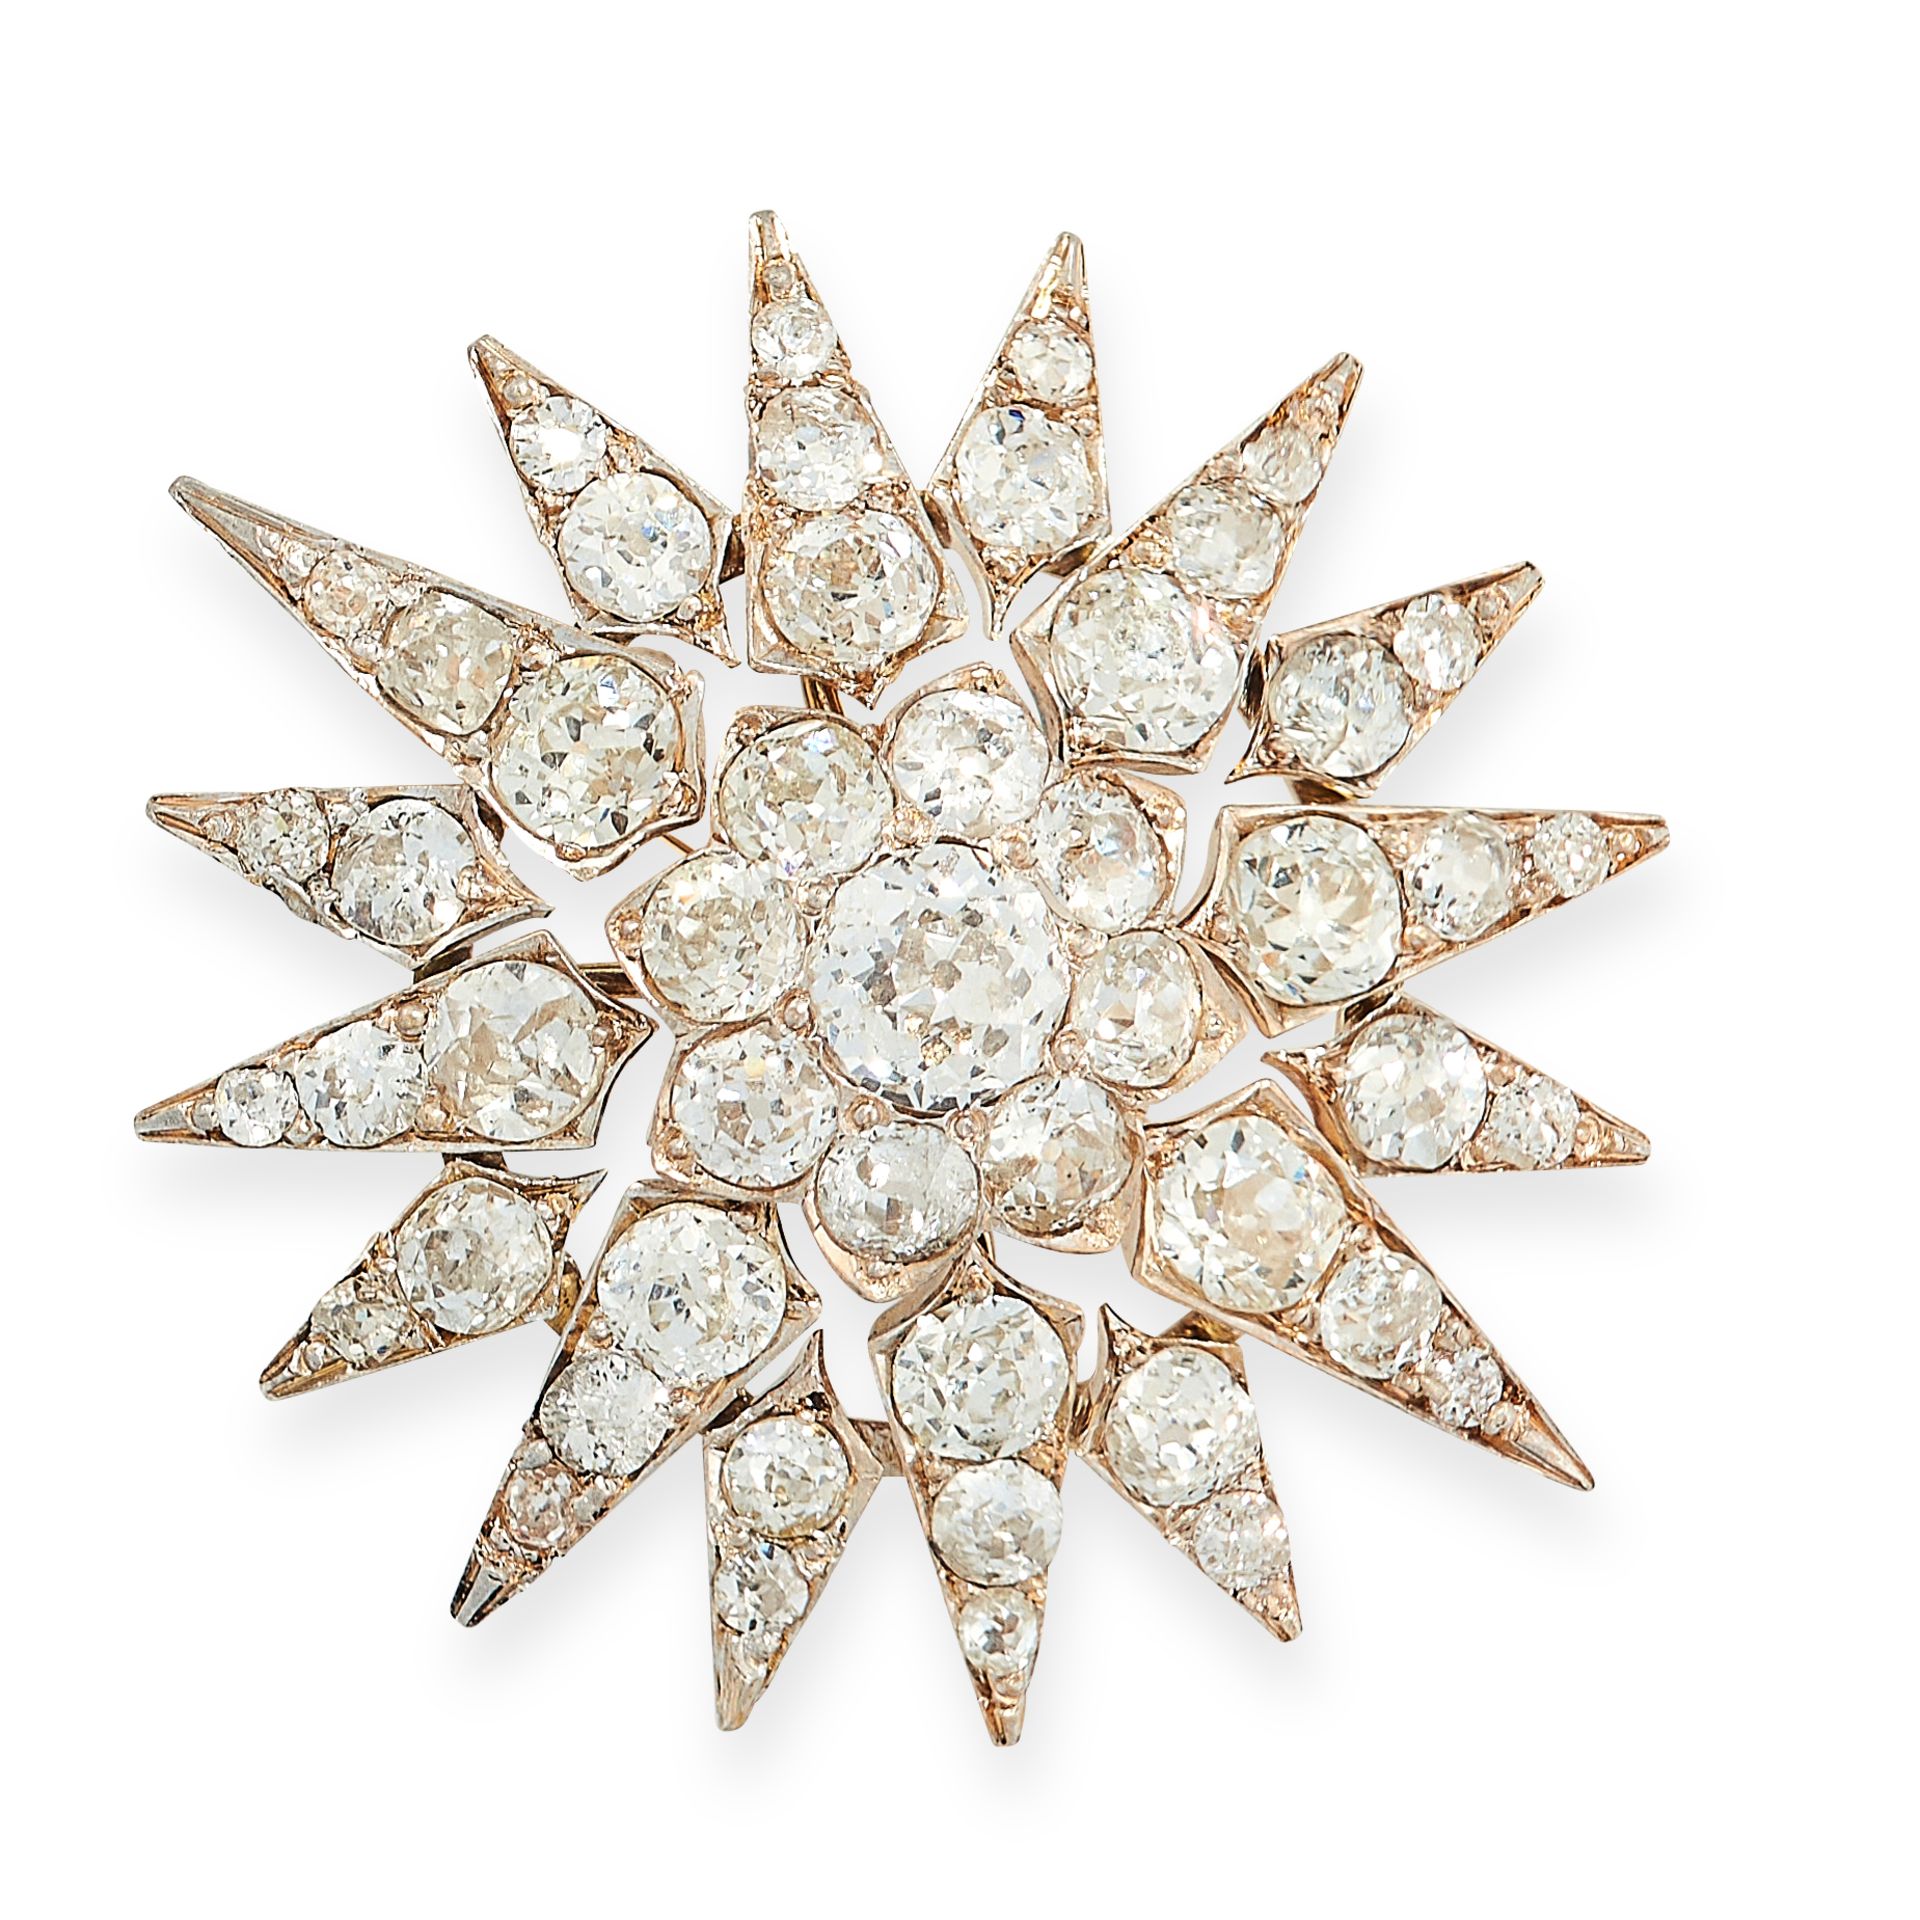 ANTIQUE DIAMOND STAR BROOCH, 19TH CENTURY in yellow gold and silver, in the form of a star burst set